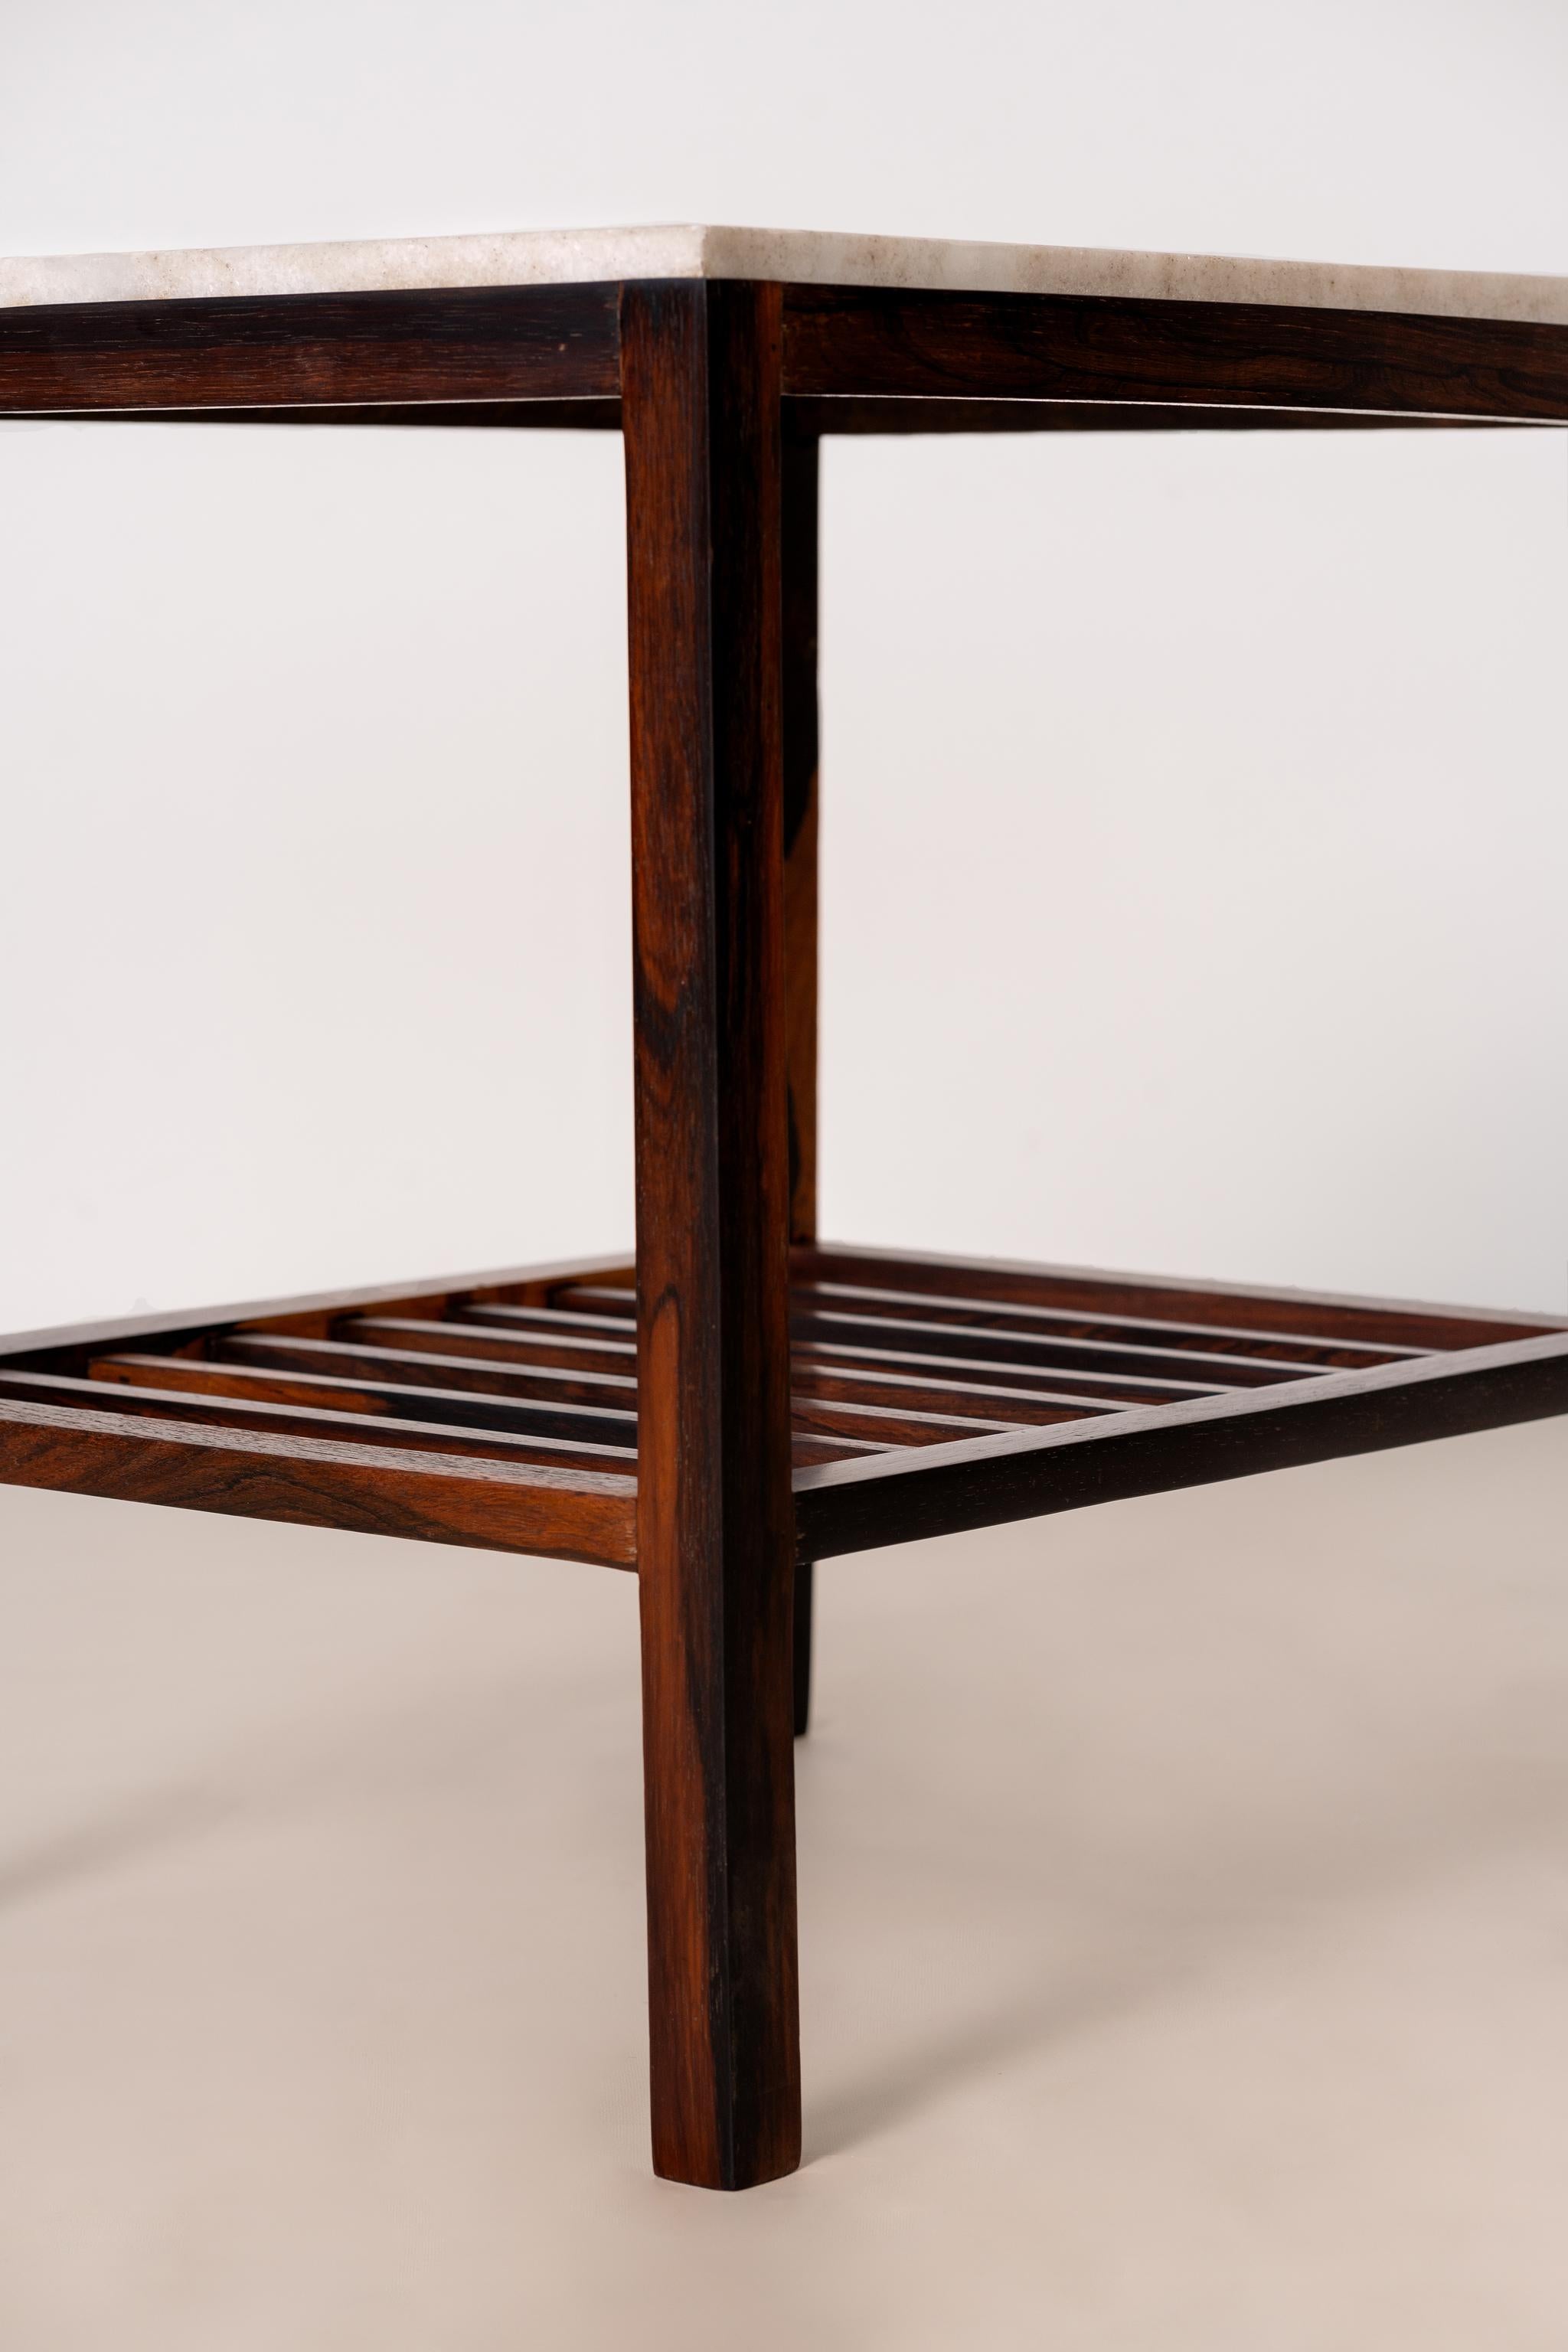 Brazilian Midcentury Side Table in Rosewood and Marble, c. 1960 For Sale 1